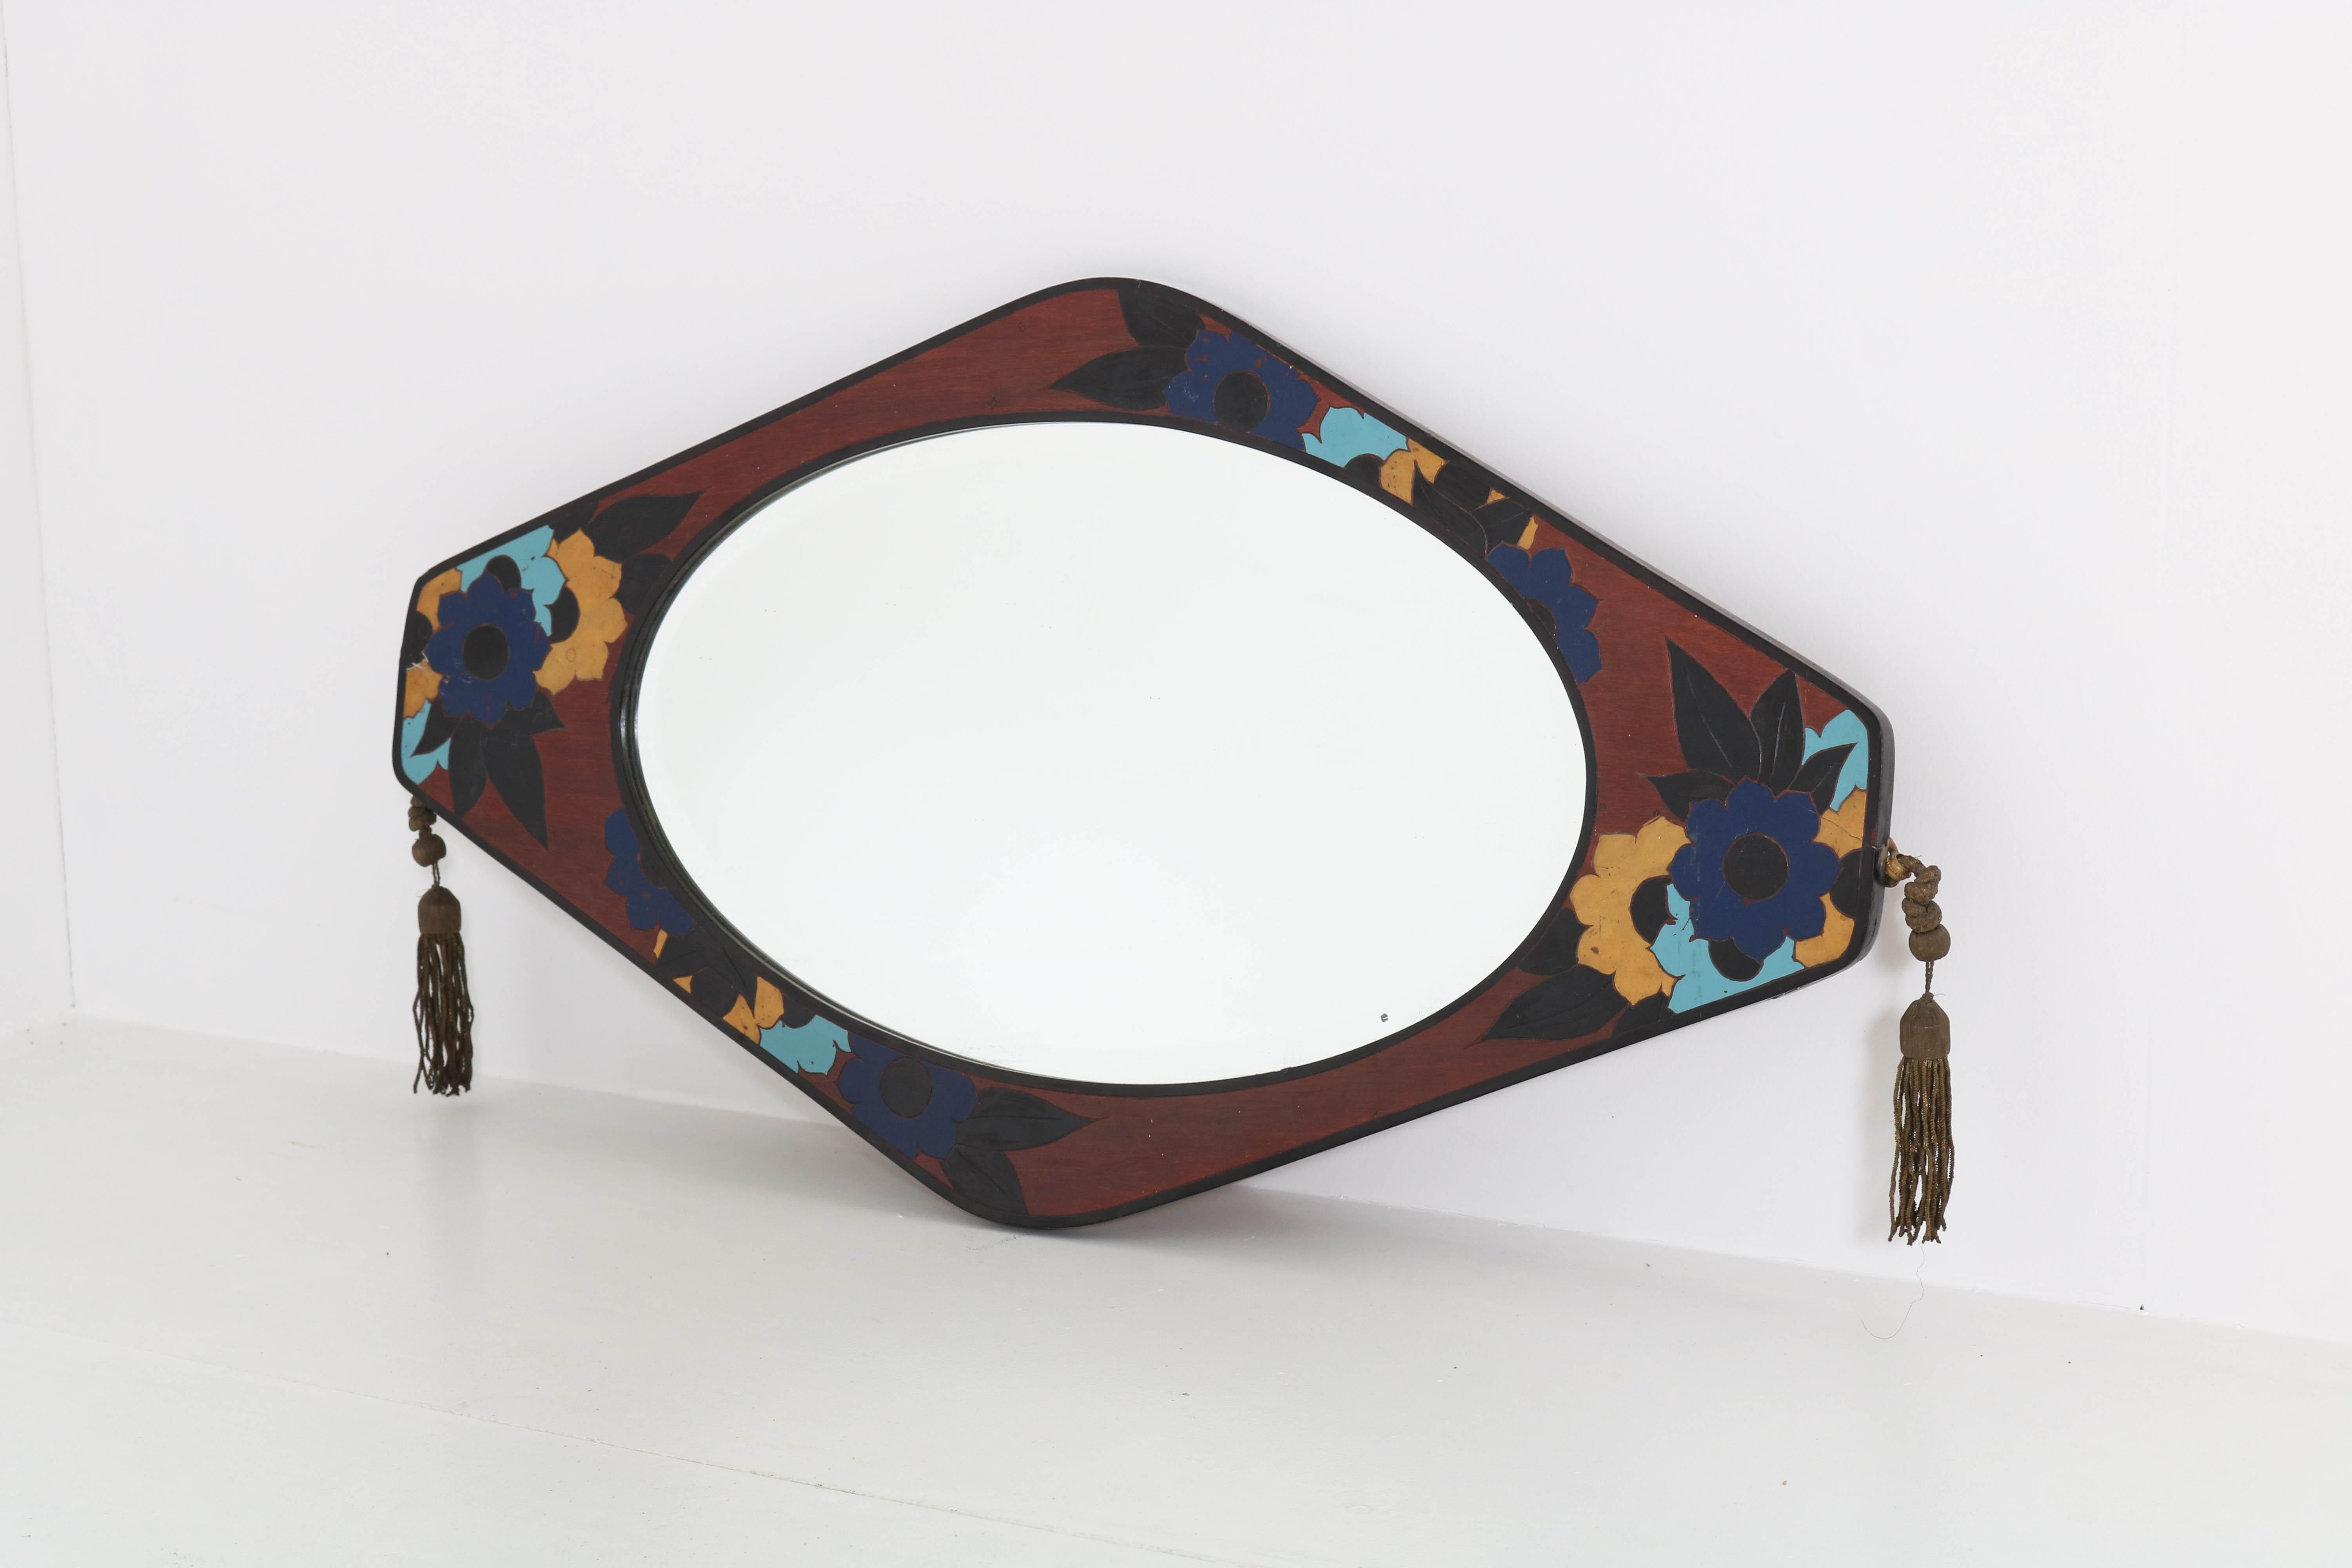 Wonderful and rare Art Deco mirror.
Striking French design from the thirties.
Mahogany veneered frame with original beveled glass mirror.
Original marquetry inlay of colorful flowers.
In good original condition with minor wear consistent with